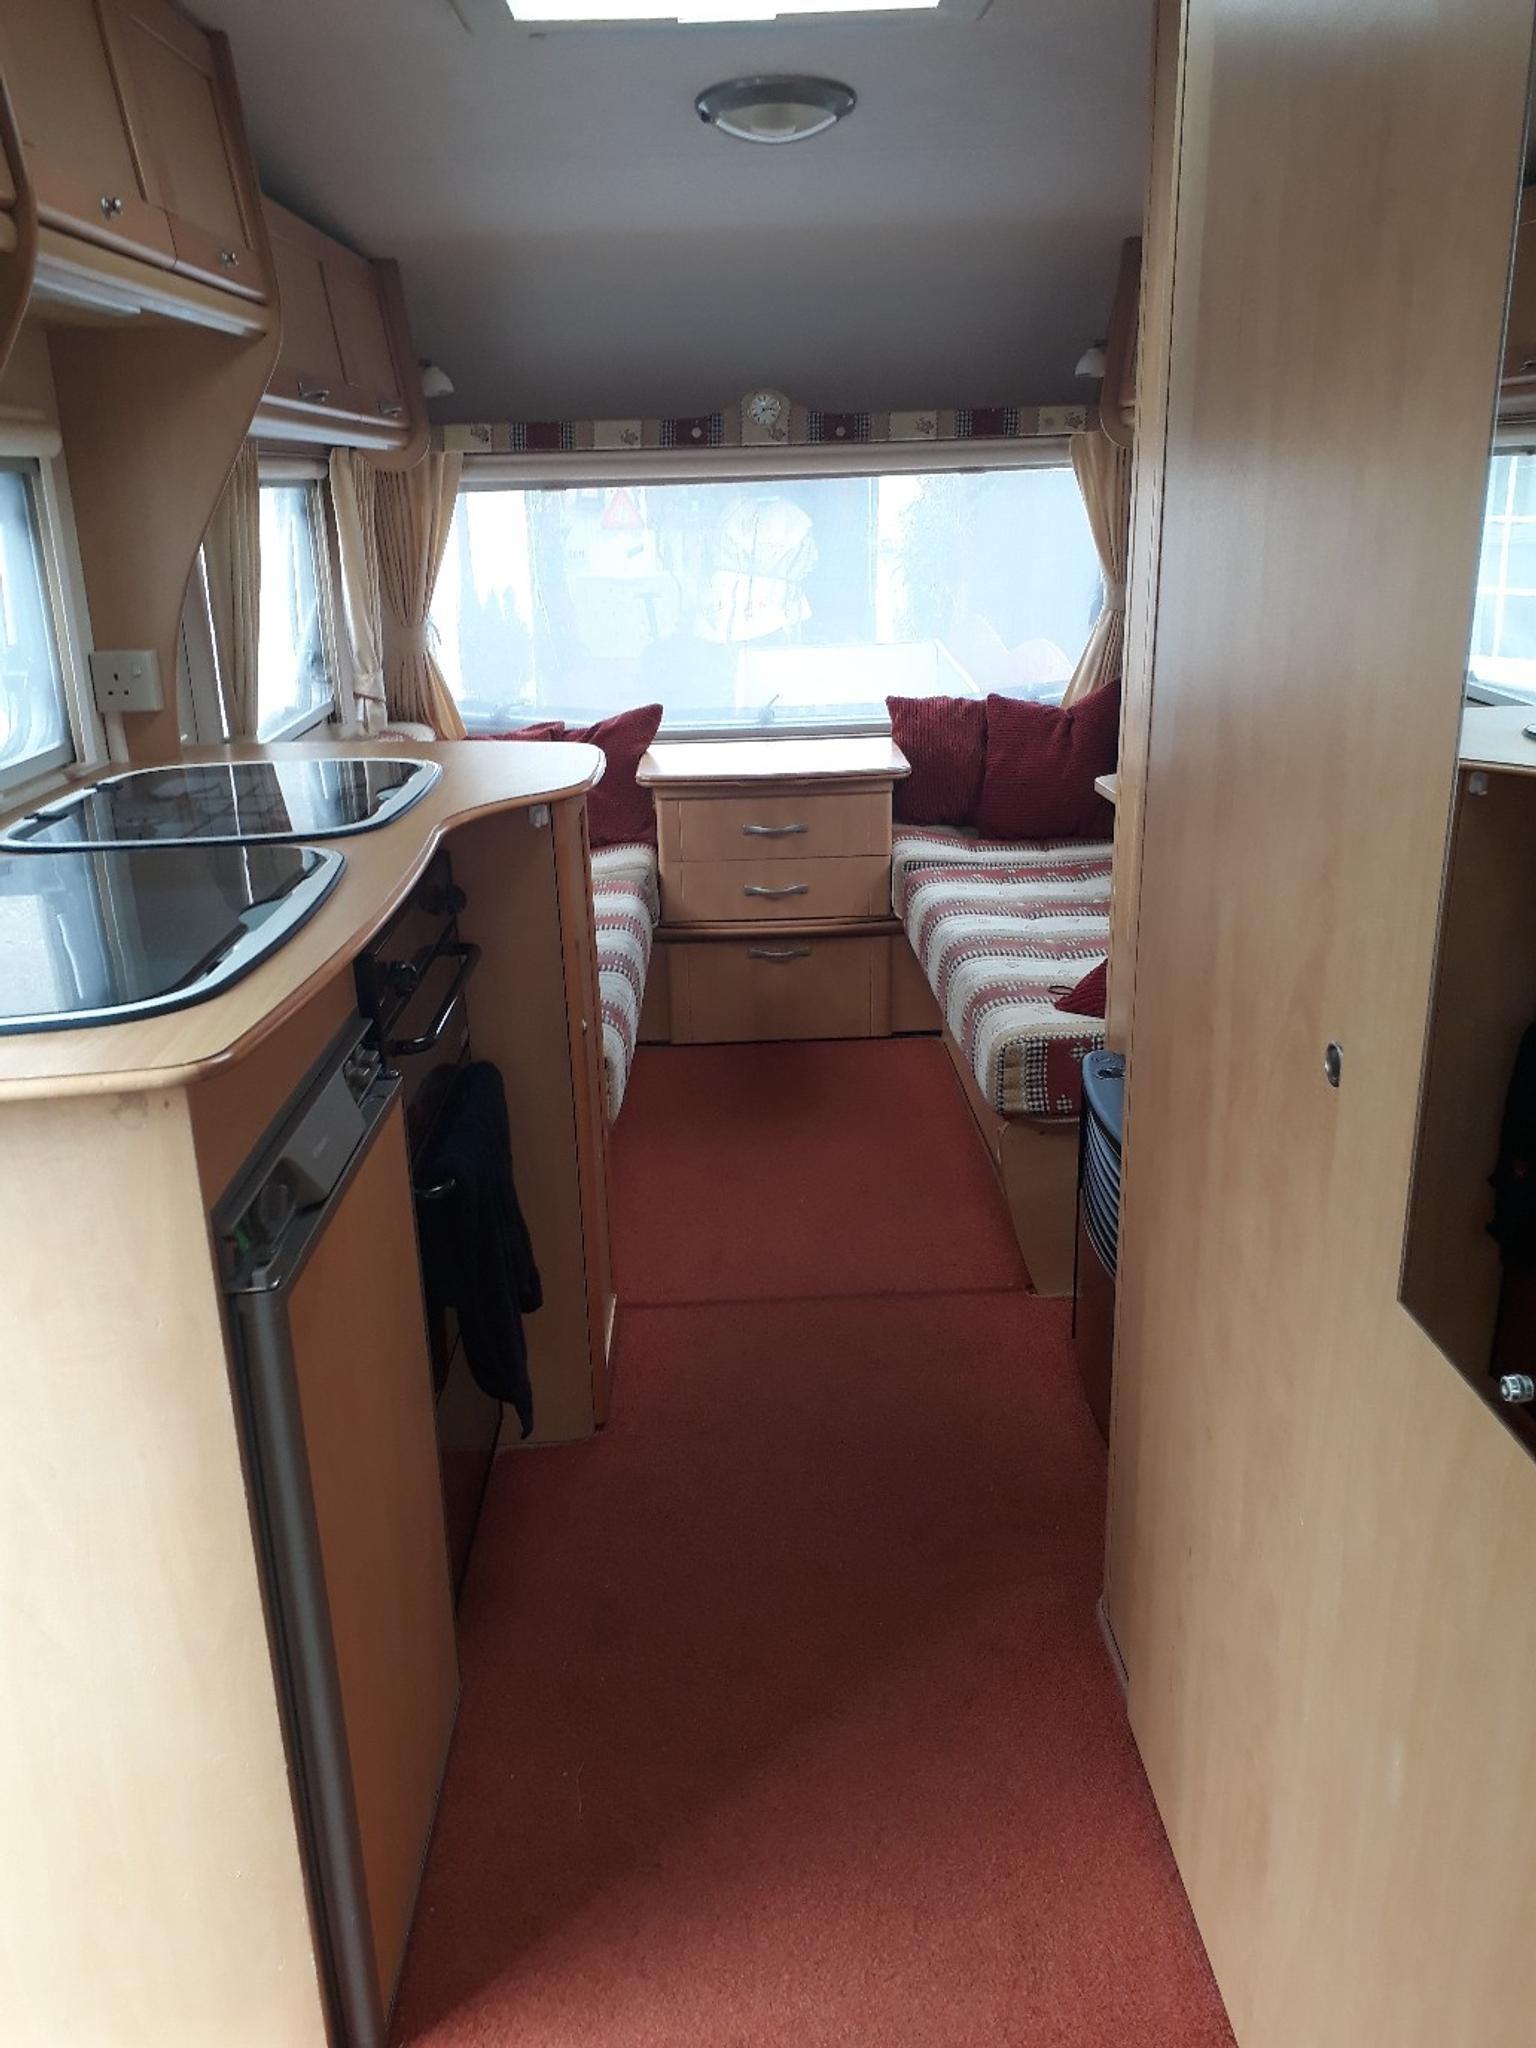 Bailey Ranger 500 5 Caravan Full Awning In Ch46 Wirral For 4 000 00 For Sale Shpock